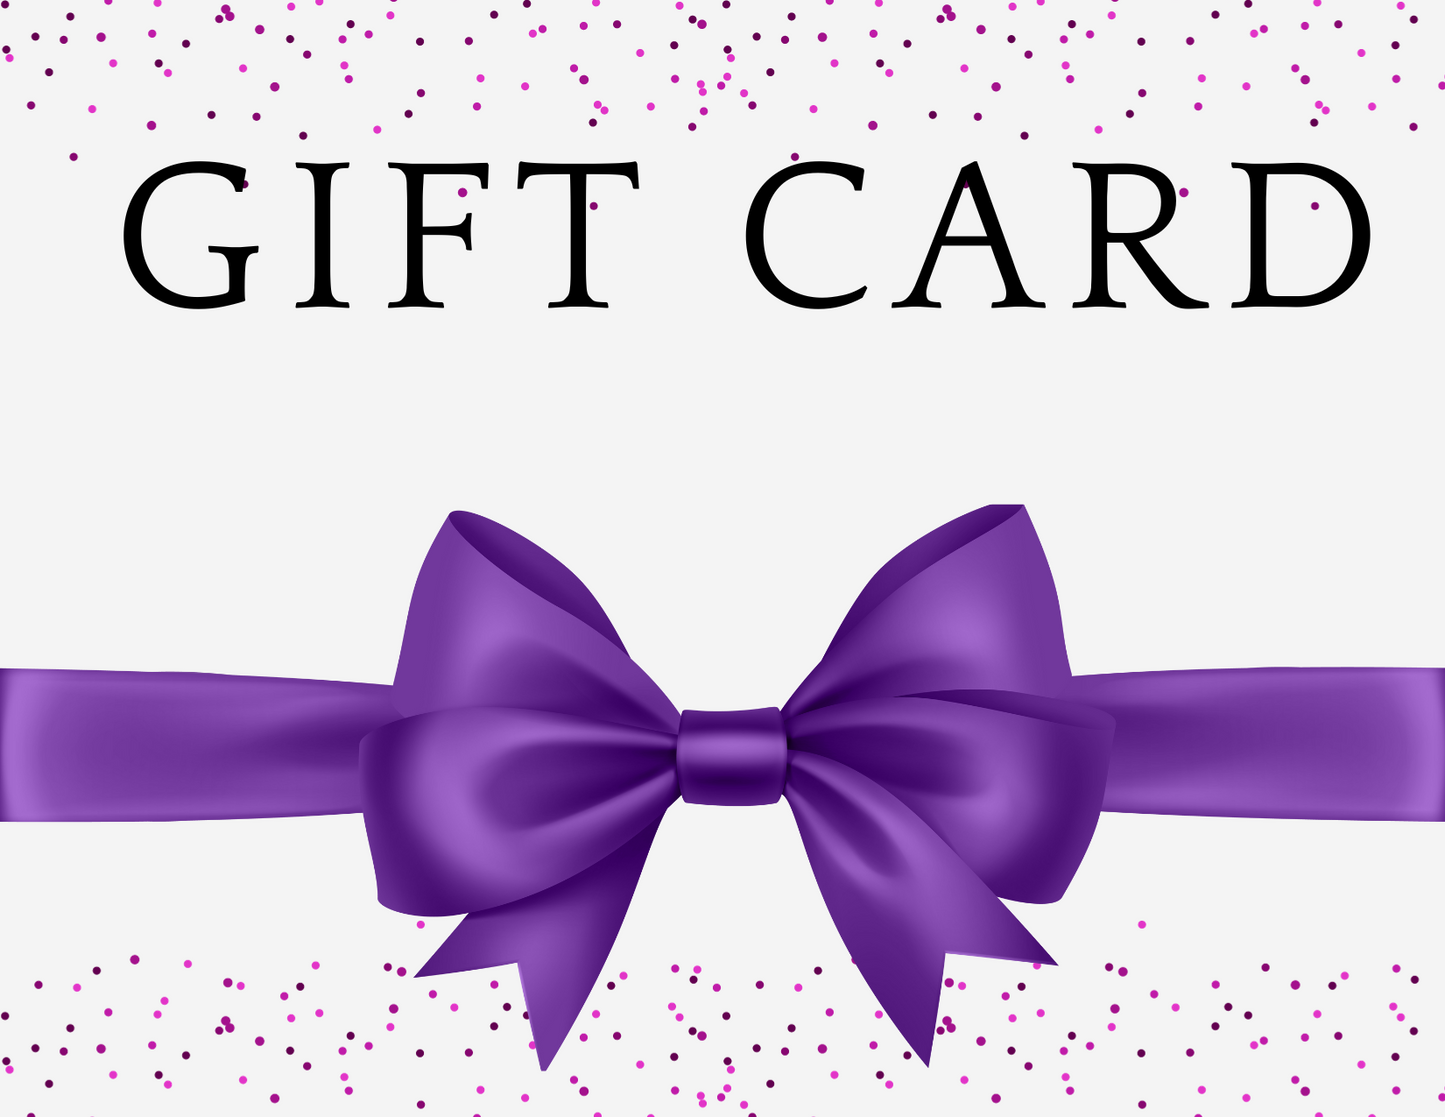 Knitting Needle Outlet Gift Card